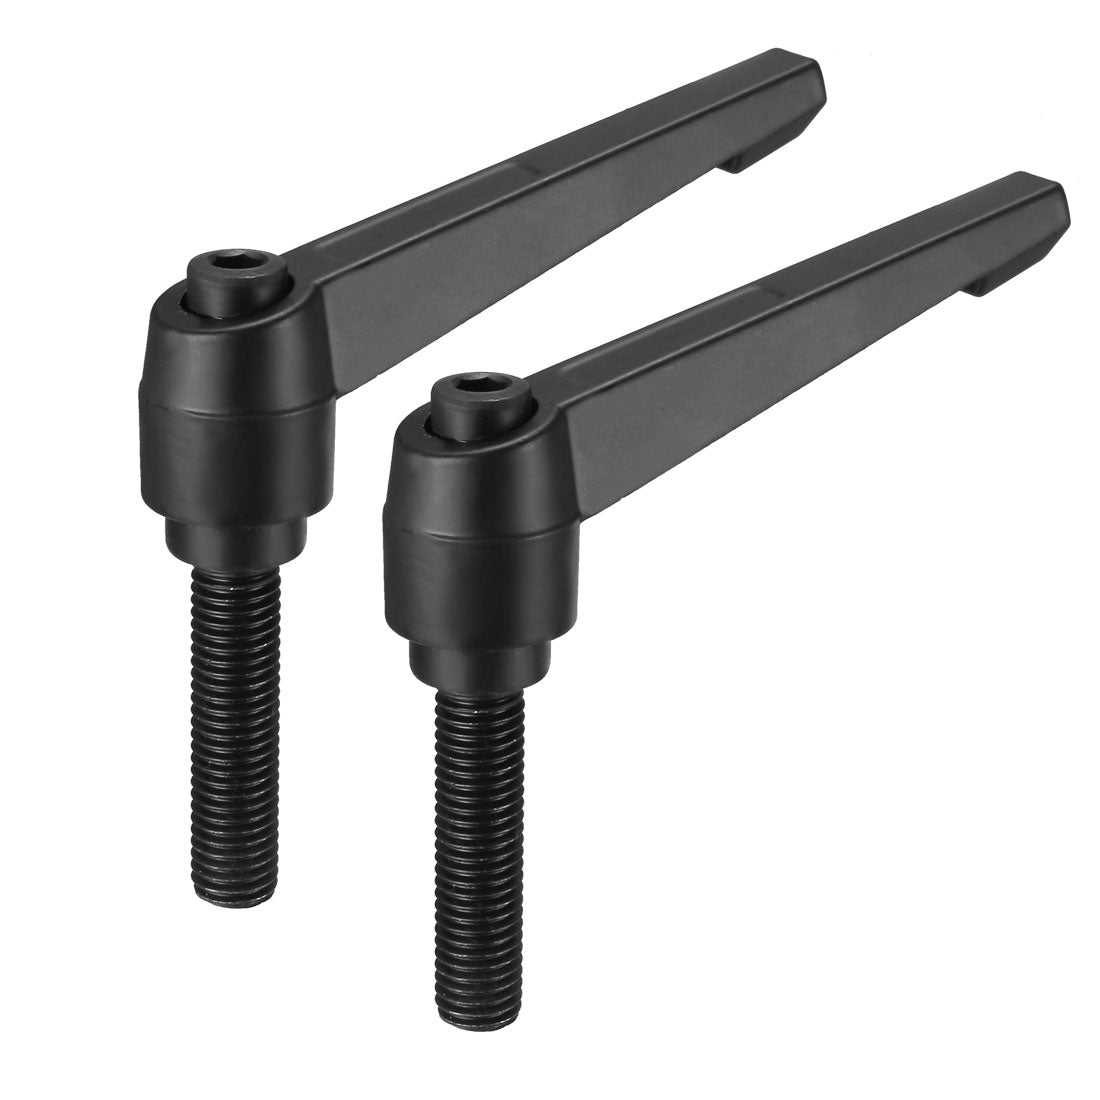 uxcell Uxcell Handles Adjustable Clamping Lever Thread Ratchet Male Threaded Stud 2Pack